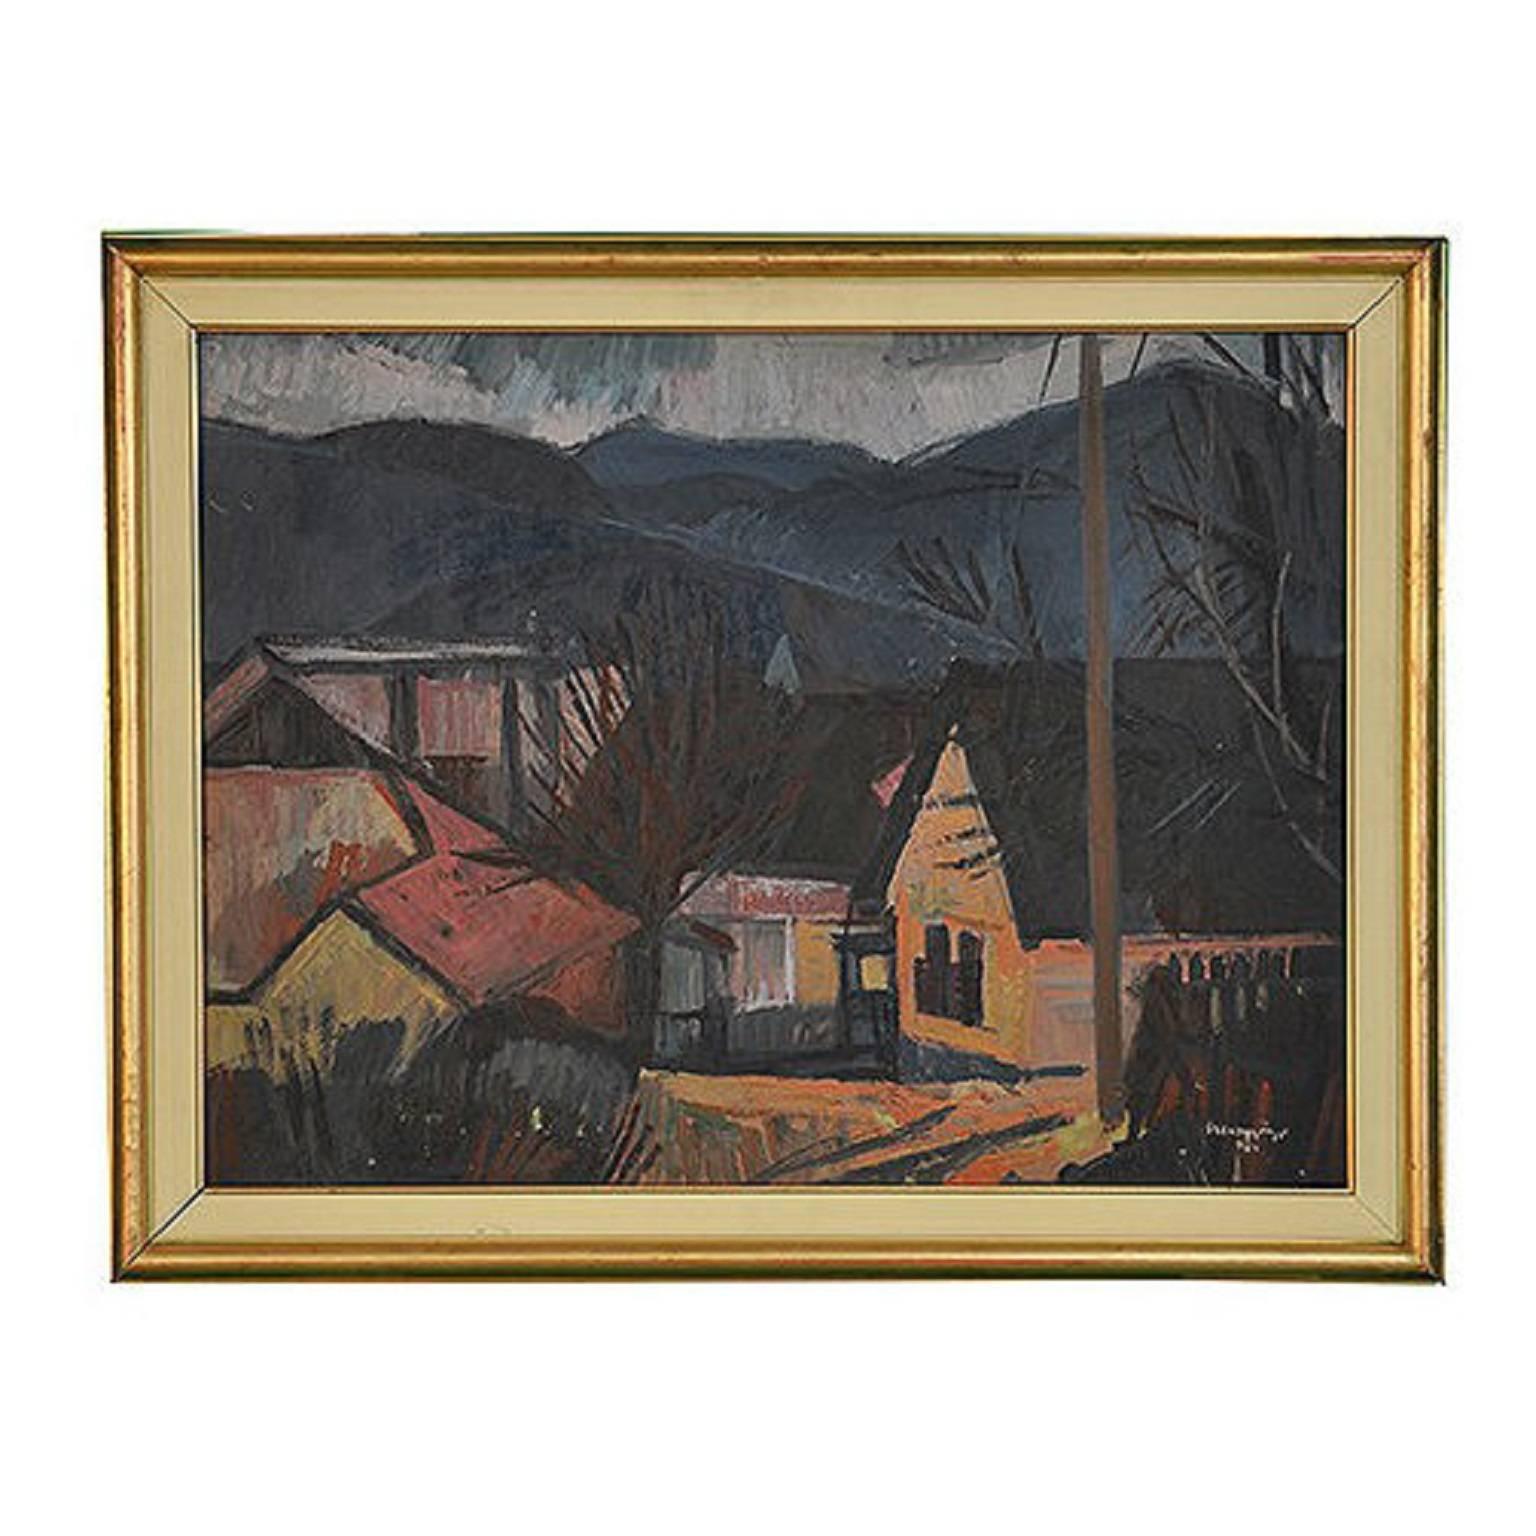 Landscape with Houses and Mountains Oil on Canvas Painting by Szentgyorgi Kormel